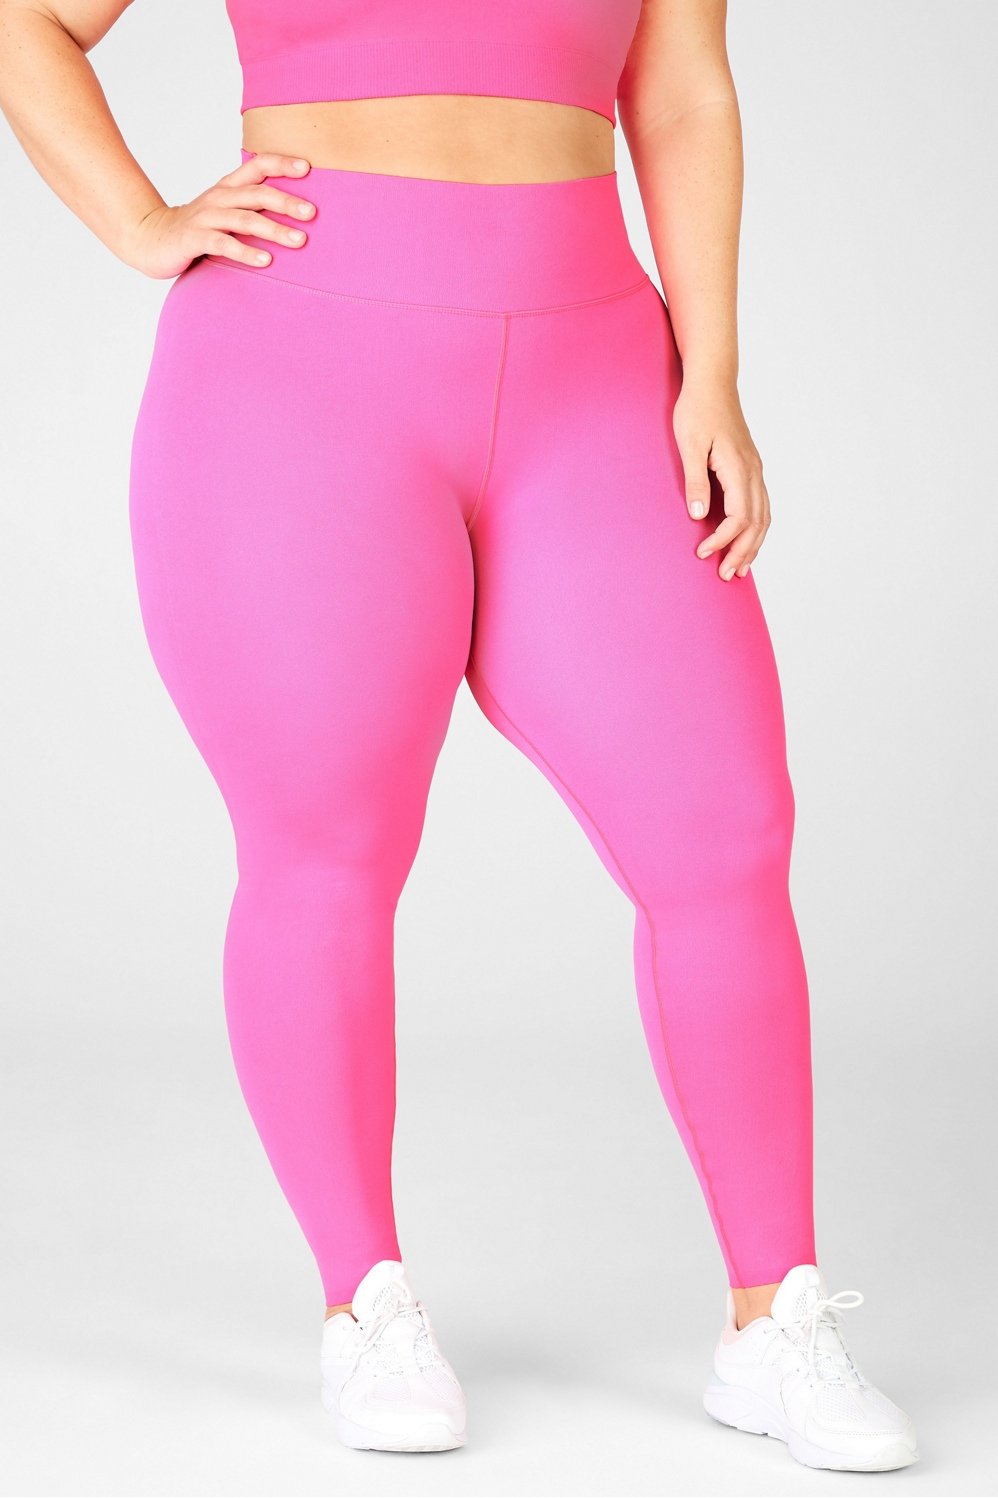 SetActive NEW Sportbody Sculptec Full Length Leggings in Canyon Pink Size  XL